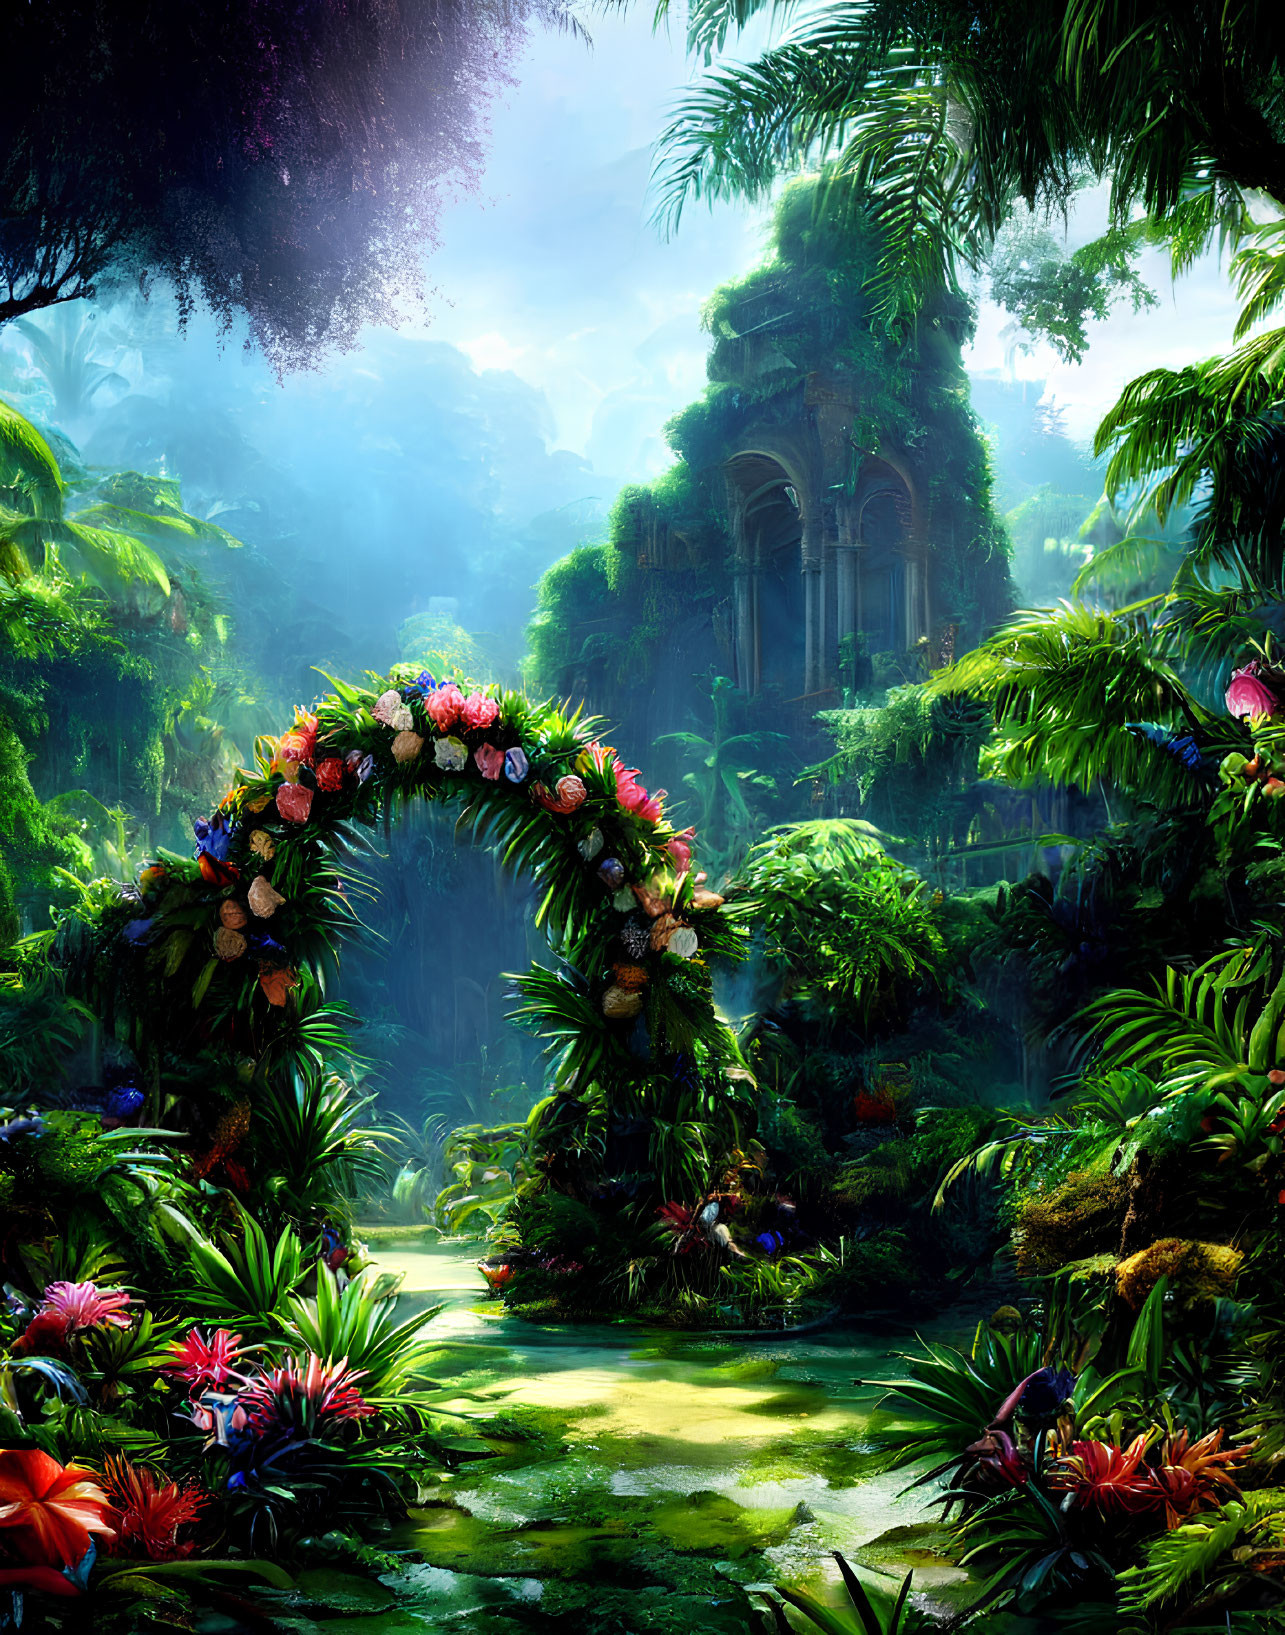 Vibrant jungle scene with colorful flowers, archway, and ancient ruins in mystical light